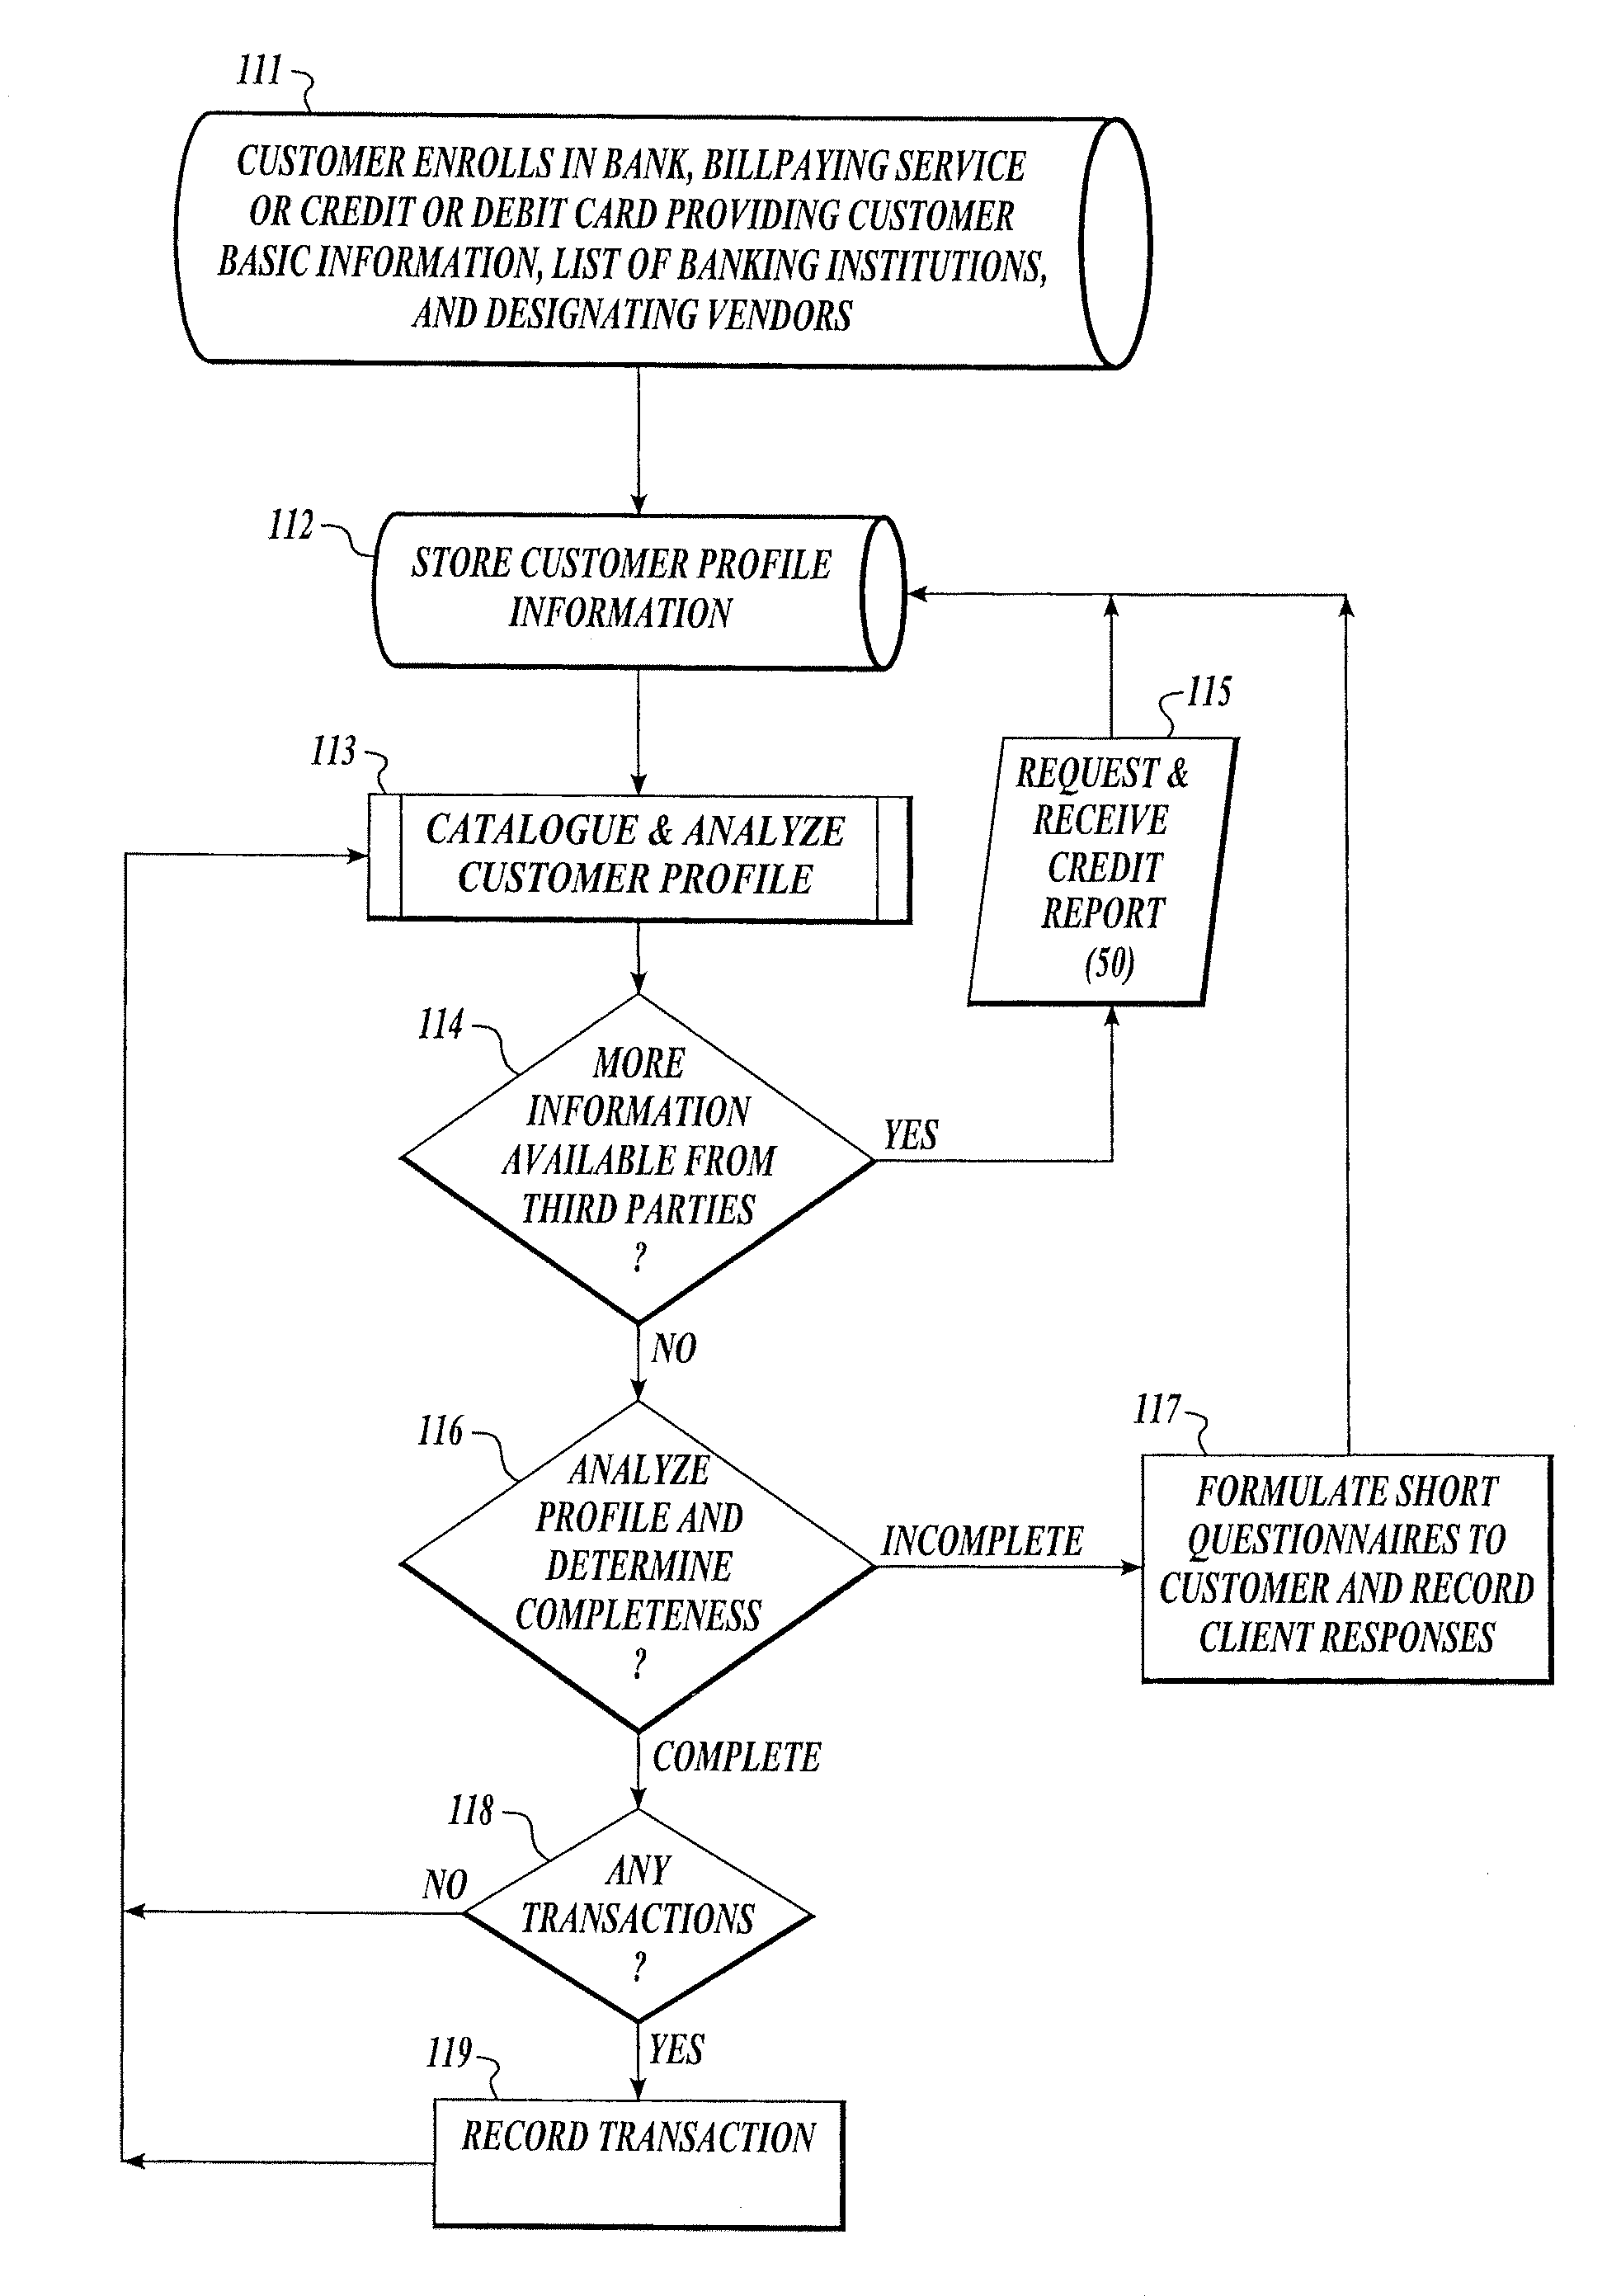 System and method for dynamic price setting and facilitation of commercial transactions